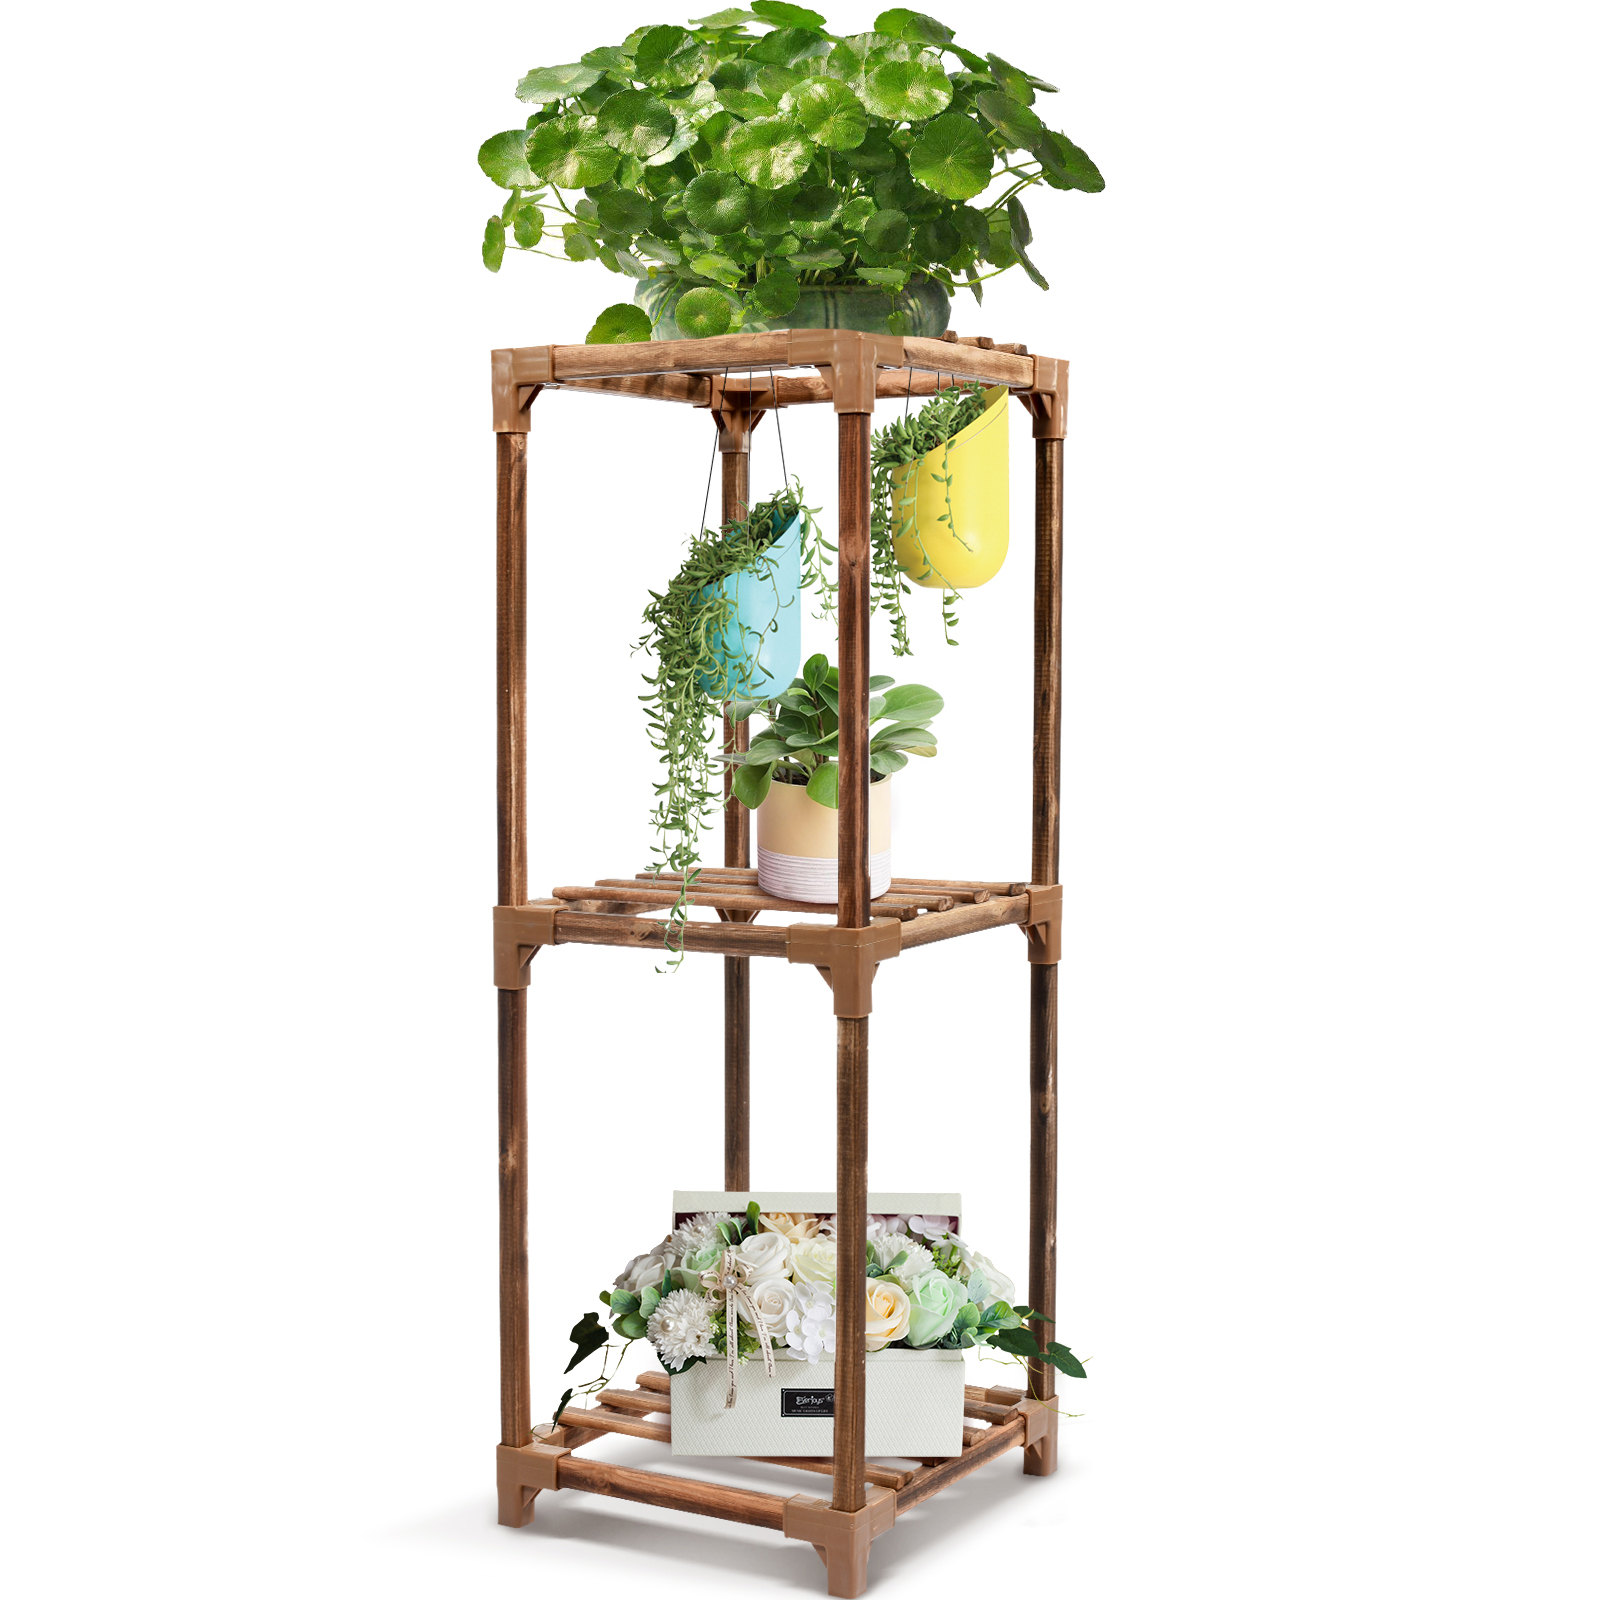 CFMOUR Wood Plant Stand Indoor, 3 Tier Tall Plant Shelf Flower Pot Stands Display Rack Holder Outdoor, Small Space Planter Stands Shelves for Corner Living Room Garden